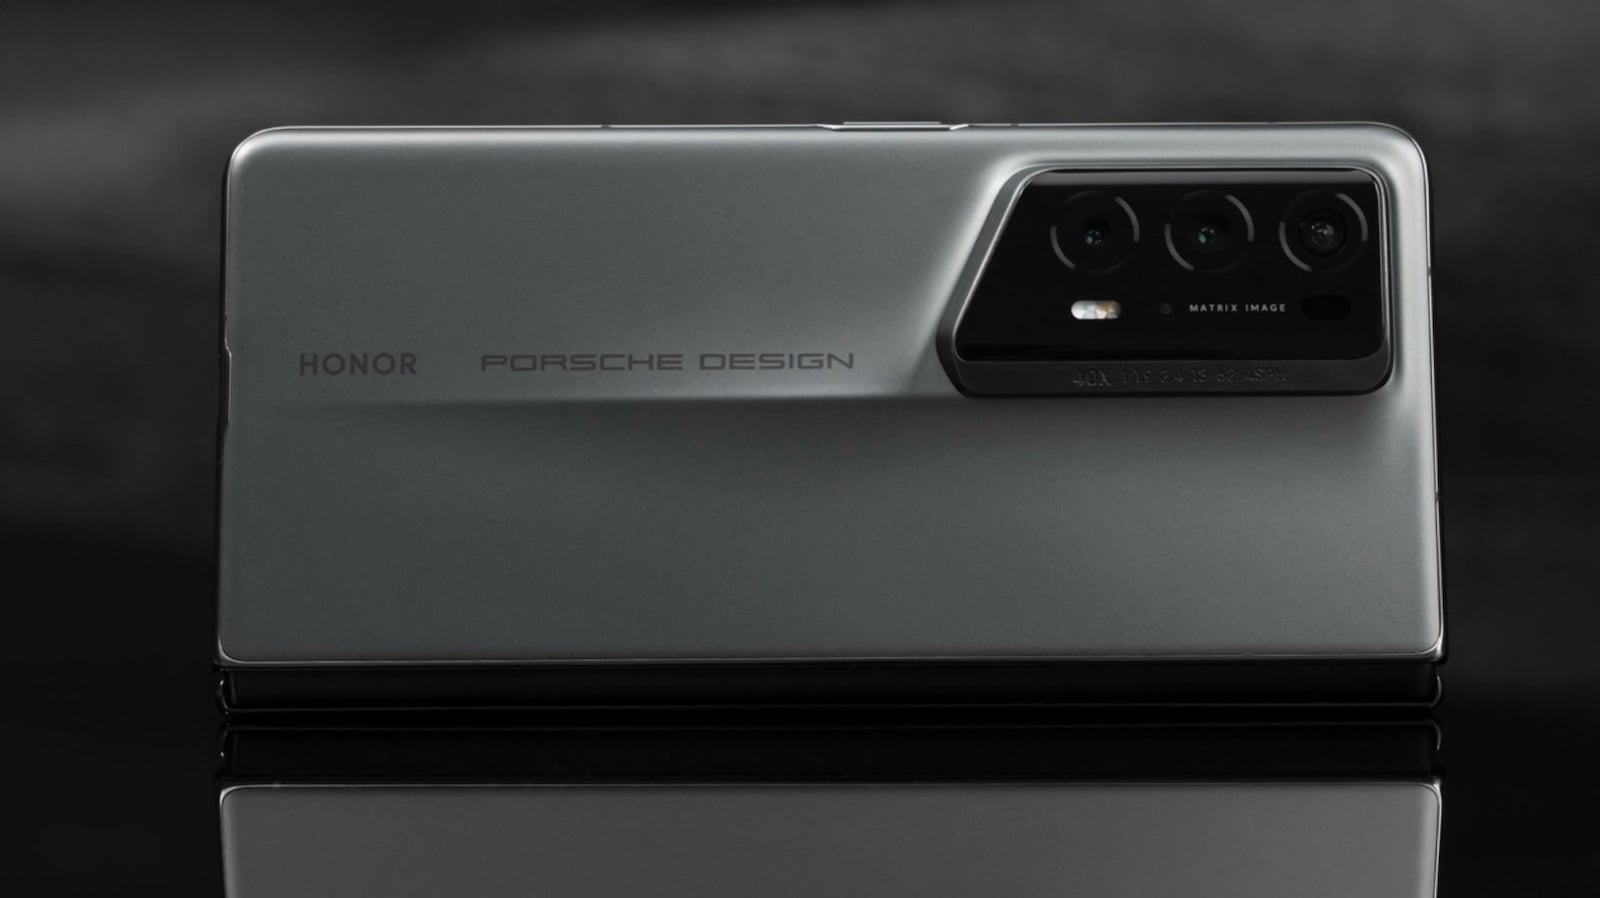 Honor Magic V2 RSR Porsche Design Launched in China